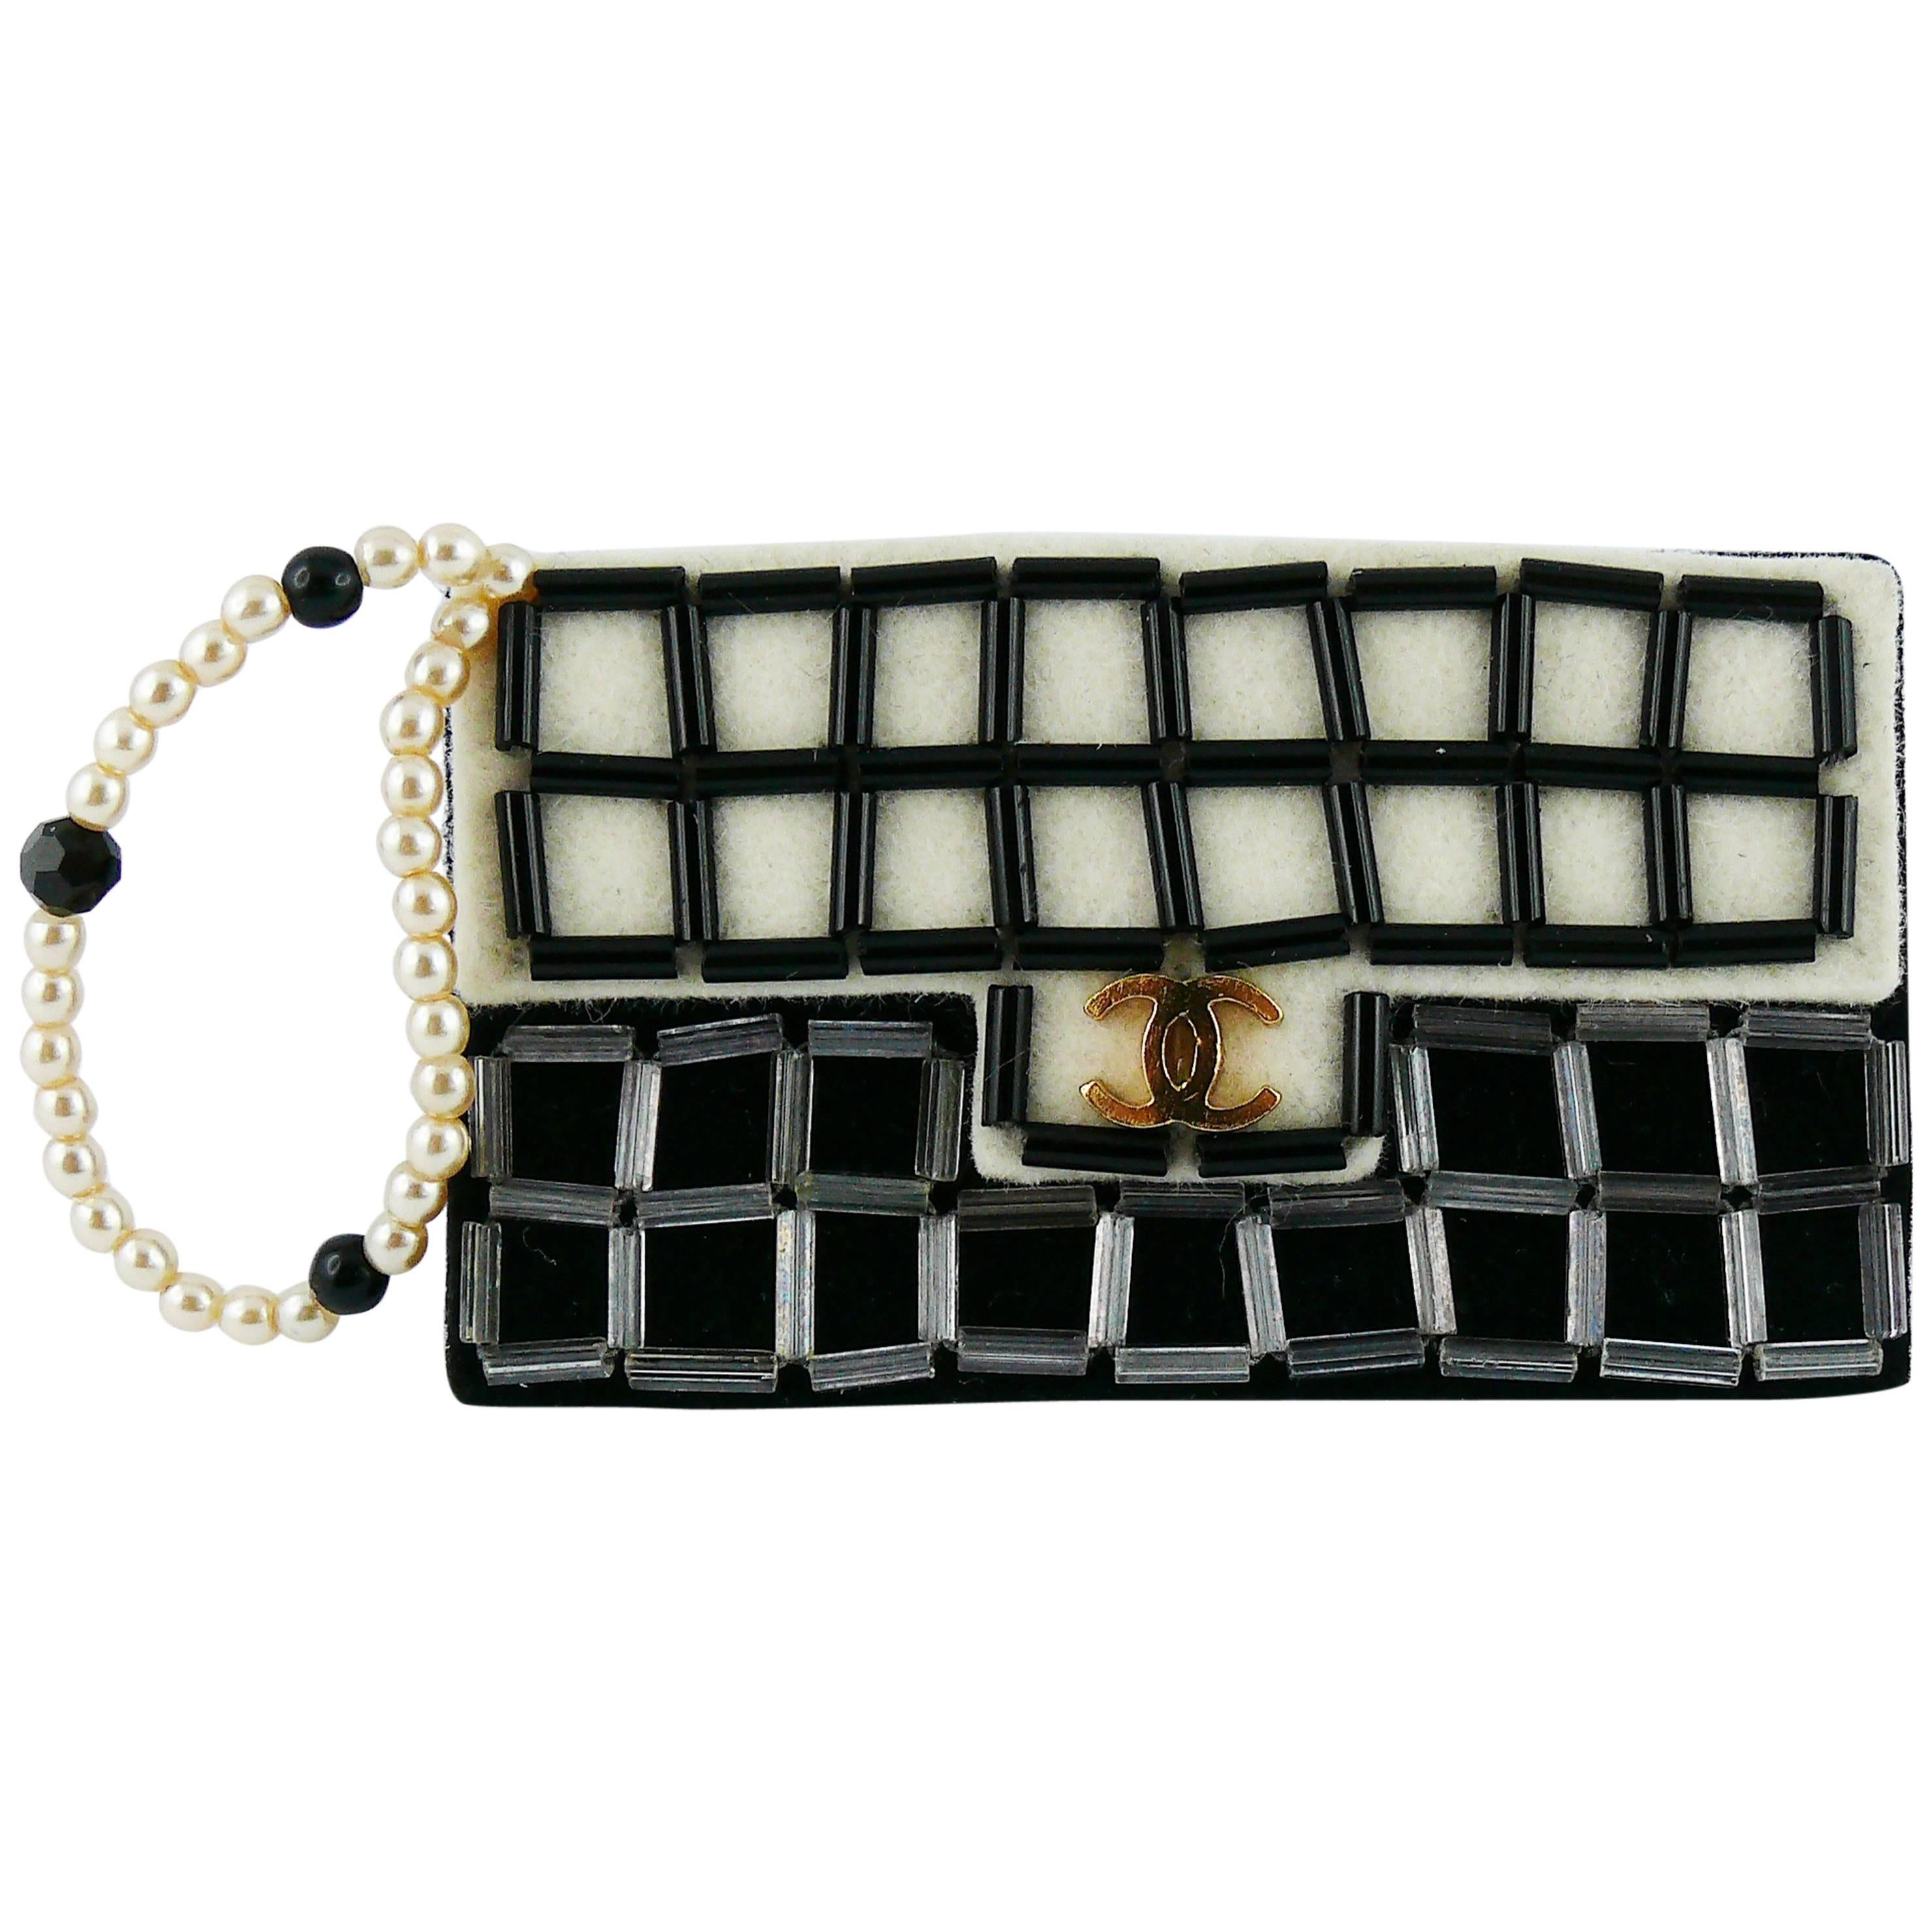 Chanel Large Iconic 2.55 Bag Felt Brooch With Faux Pearl Strap